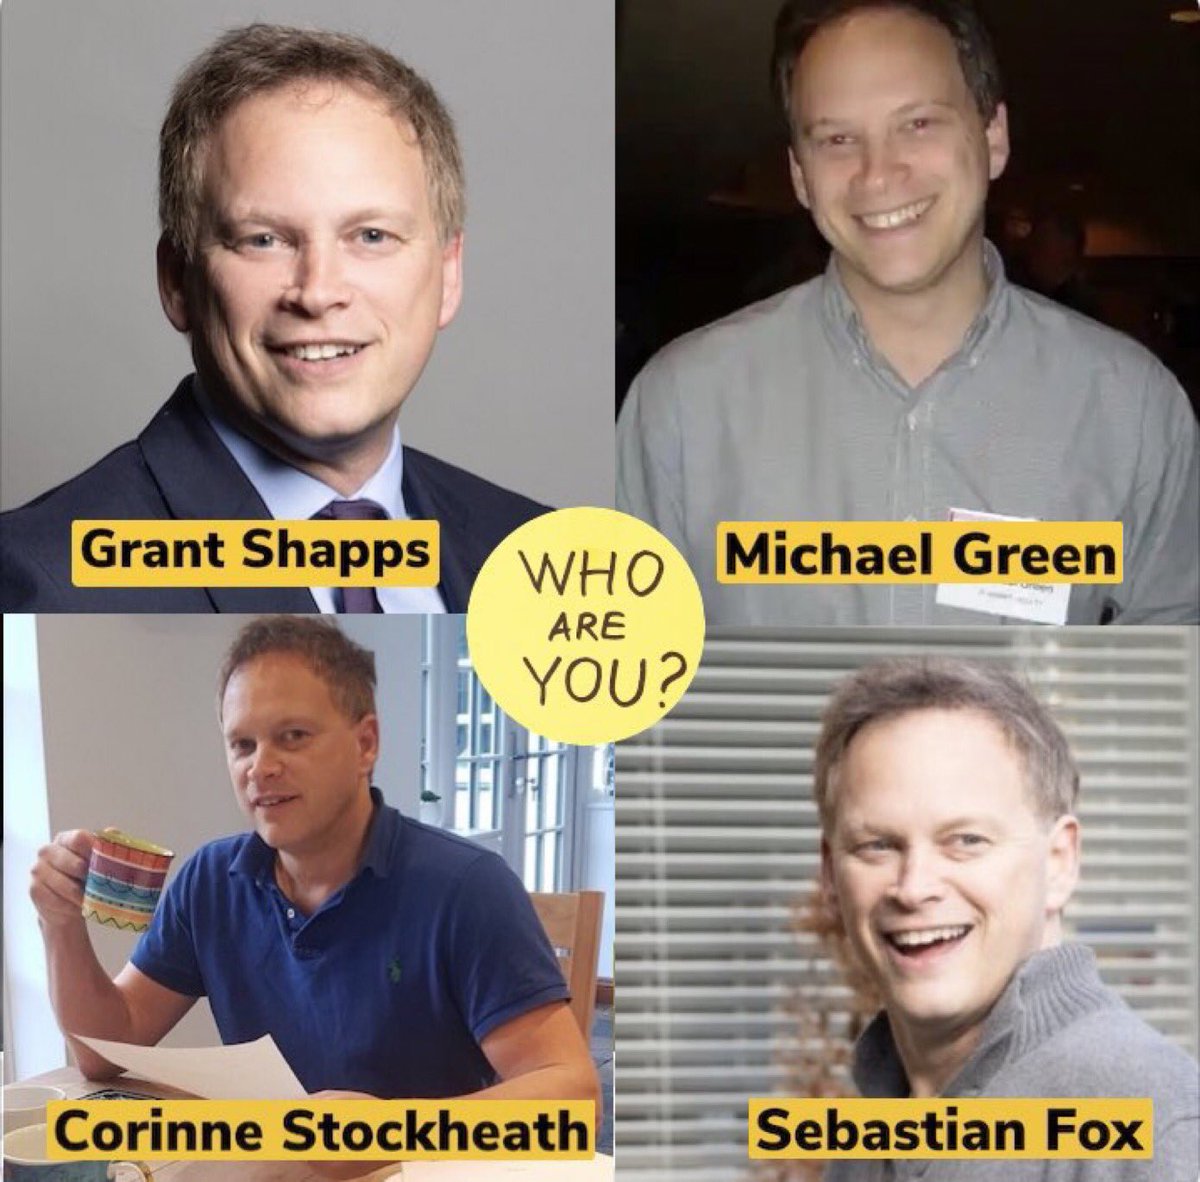 Only in Rishi Sunak's Britain could a man who ran get rich quick schemes on the internet and who has three other aliases become Defence Secretary. This is not normal. Get these ghouls out NOW!
#GrantShapps
#CorinneStockheath
#MichaelGreen
#SebastianFox